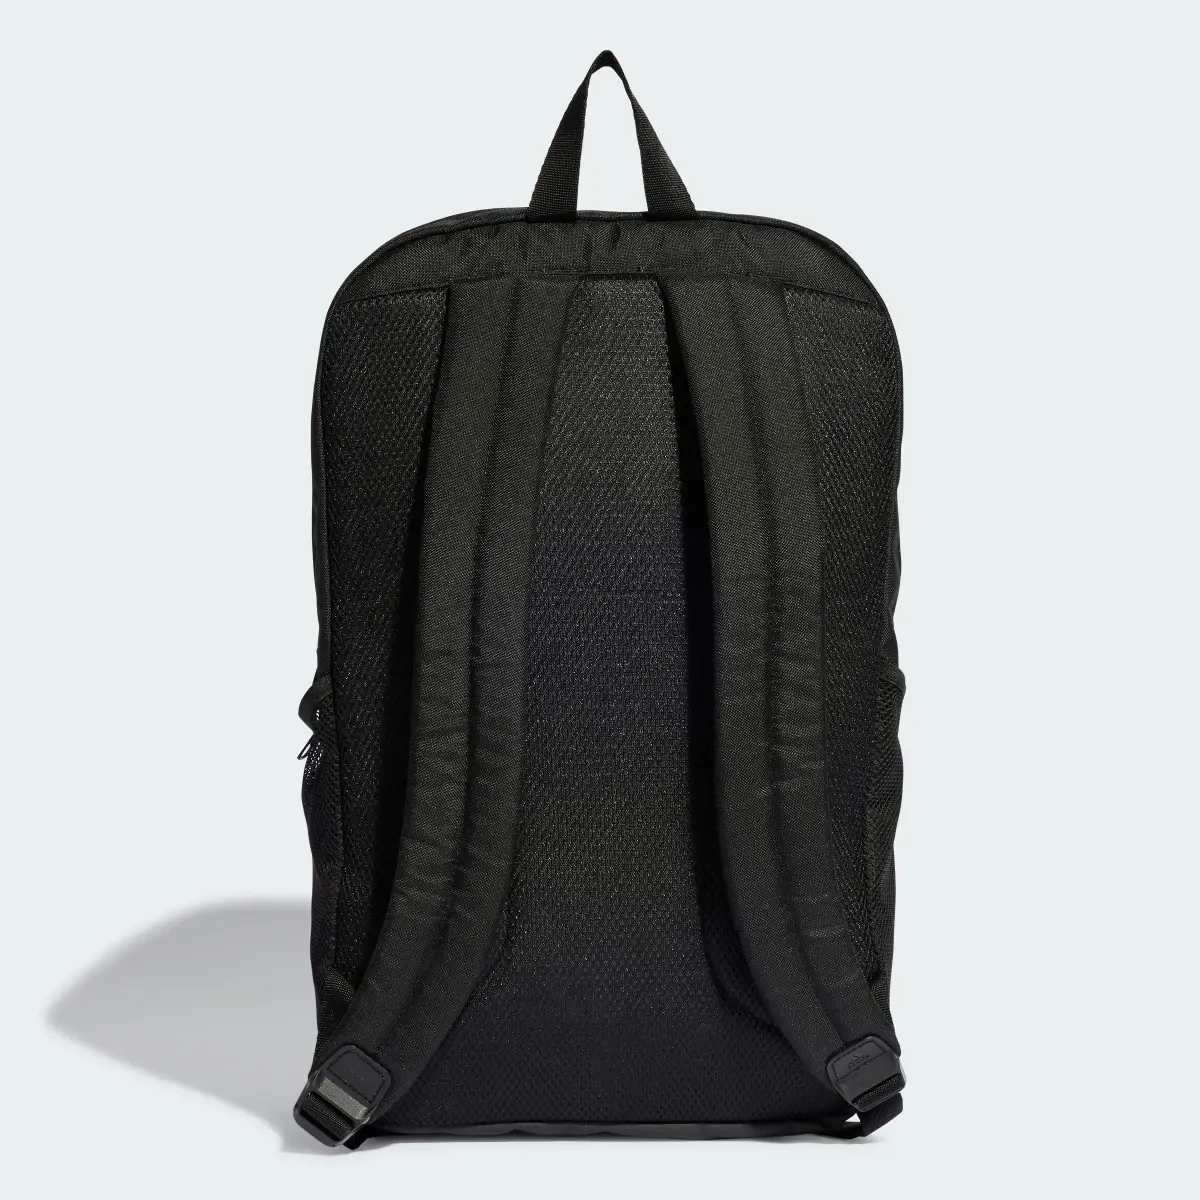 Adidas Motion SPW Graphic Backpack. 3